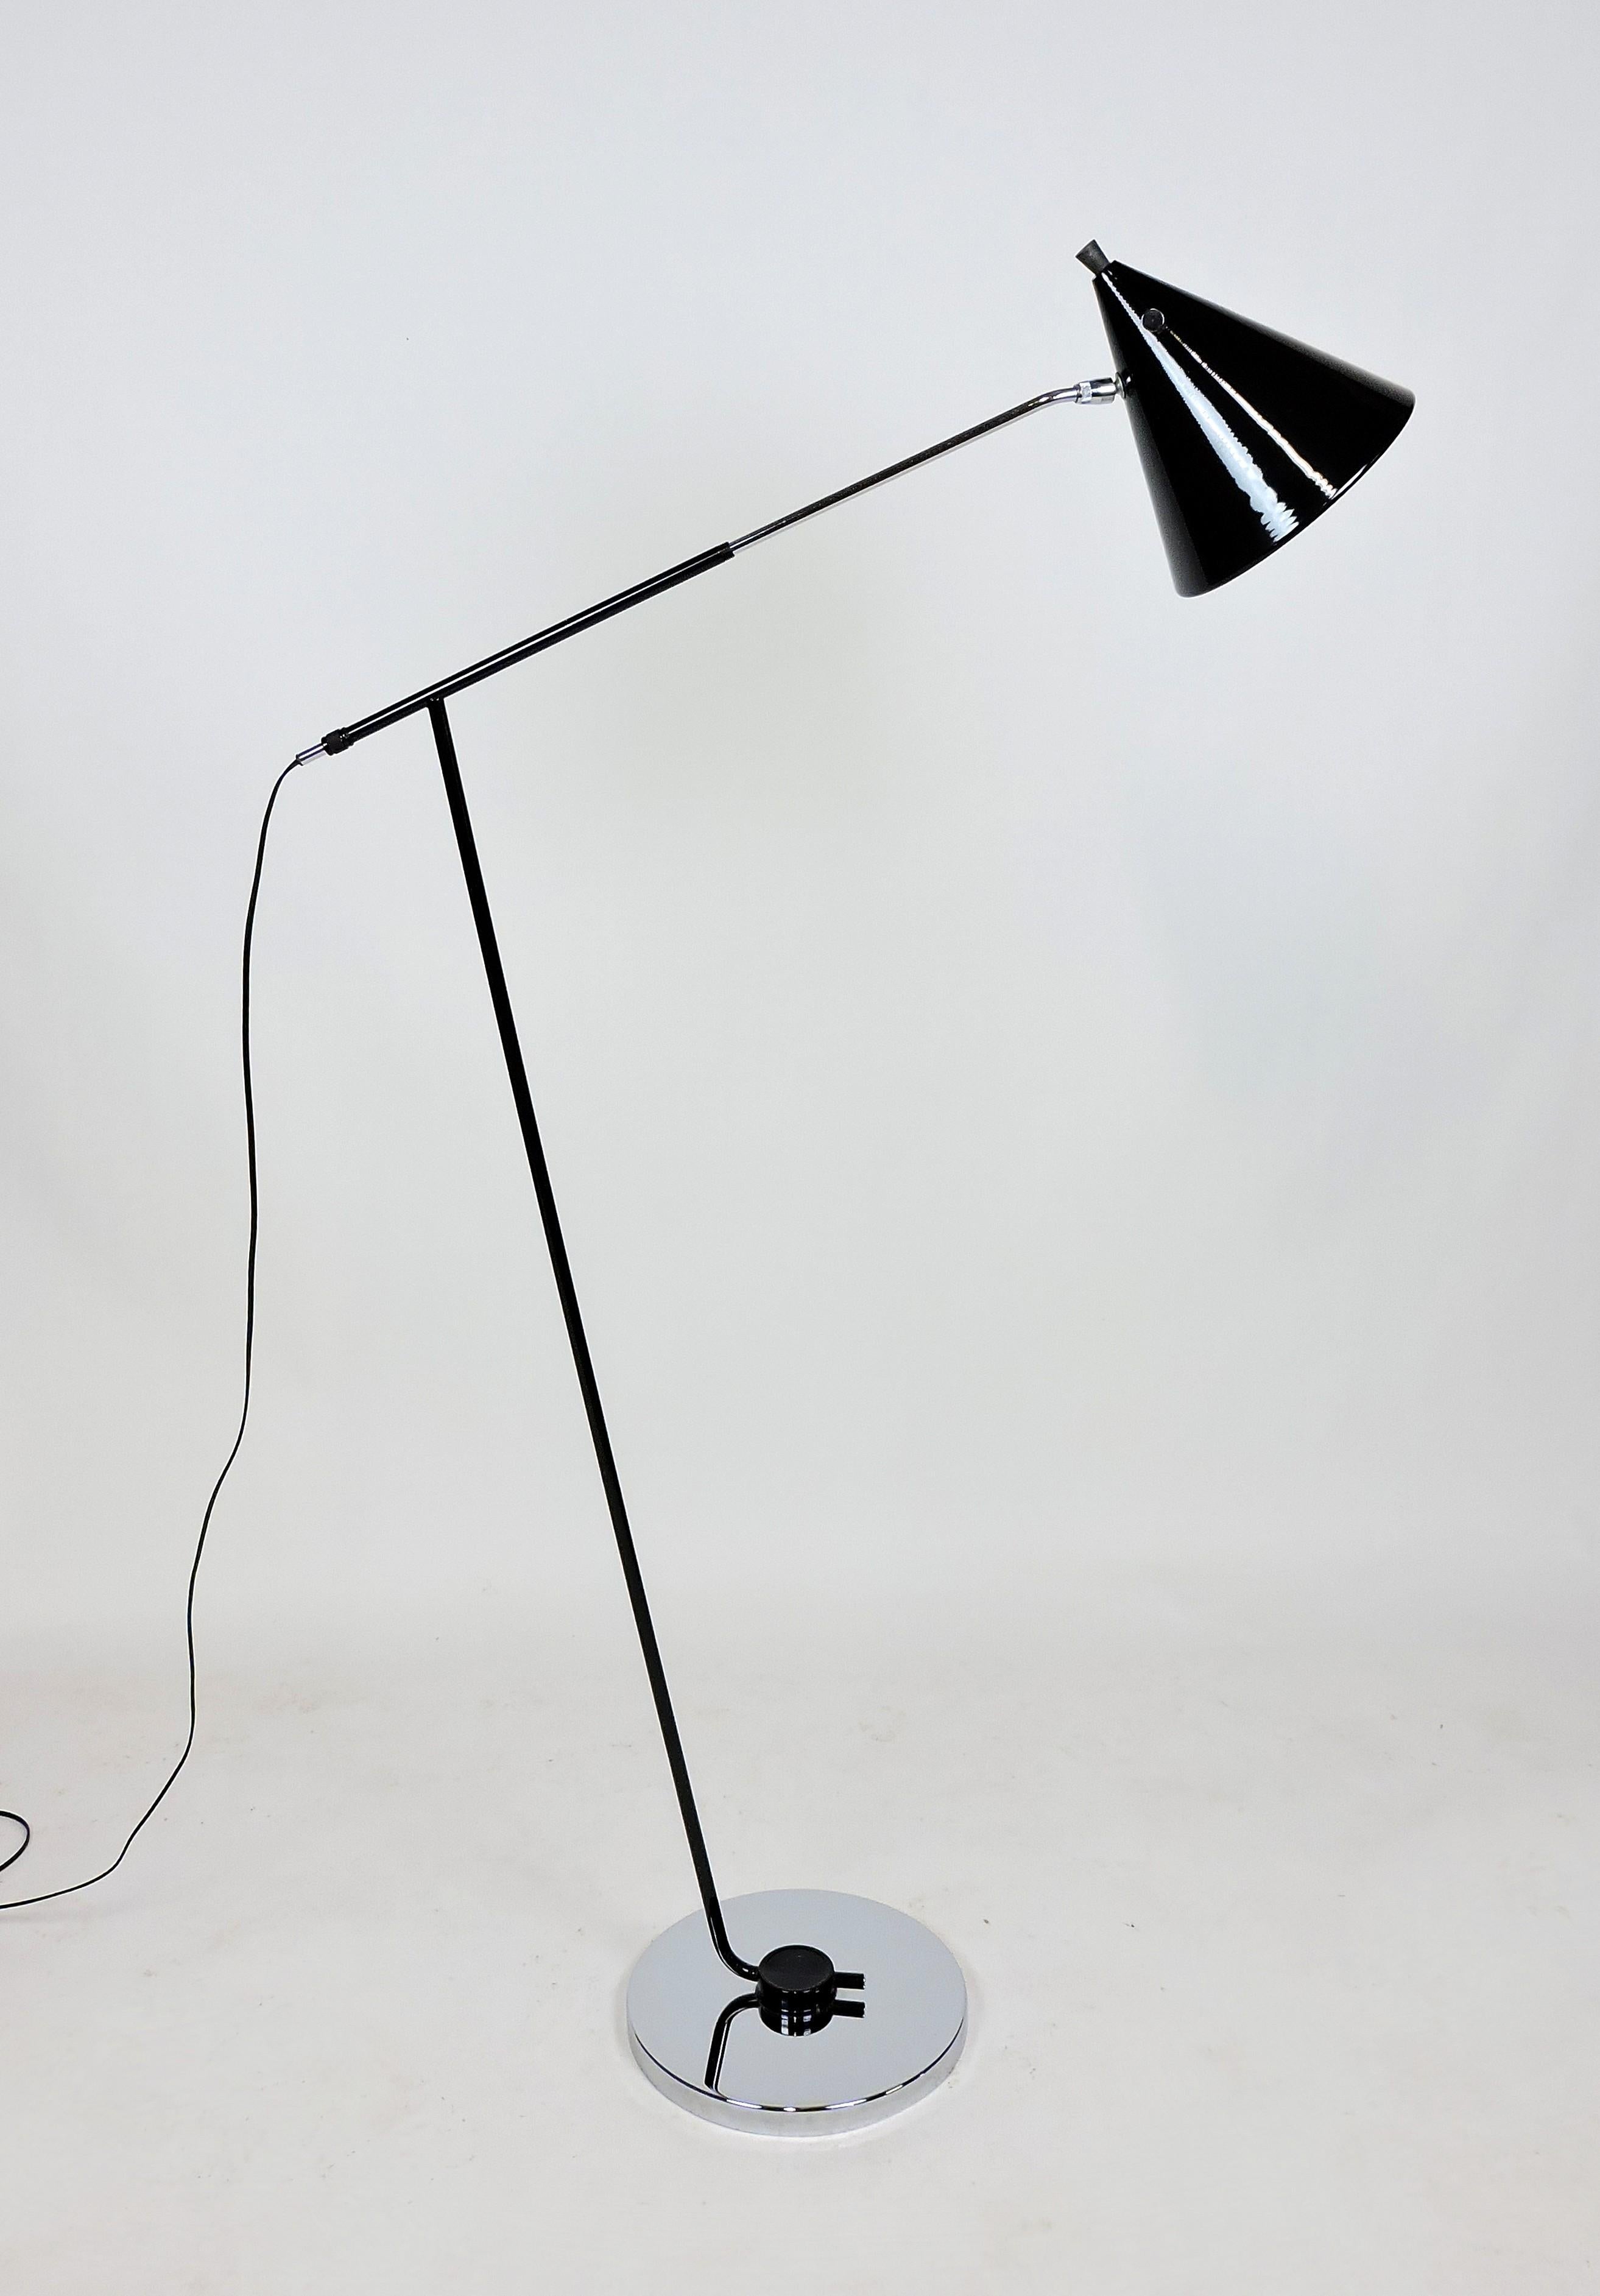 Beautiful mid century Italian modern floor lamp with an adjustable arm. This stylish lamp is made of shiny chrome and black lacquer with an arm that can be adjusted in length and a shade that can pivot to adjust the angle. All new electrical wire